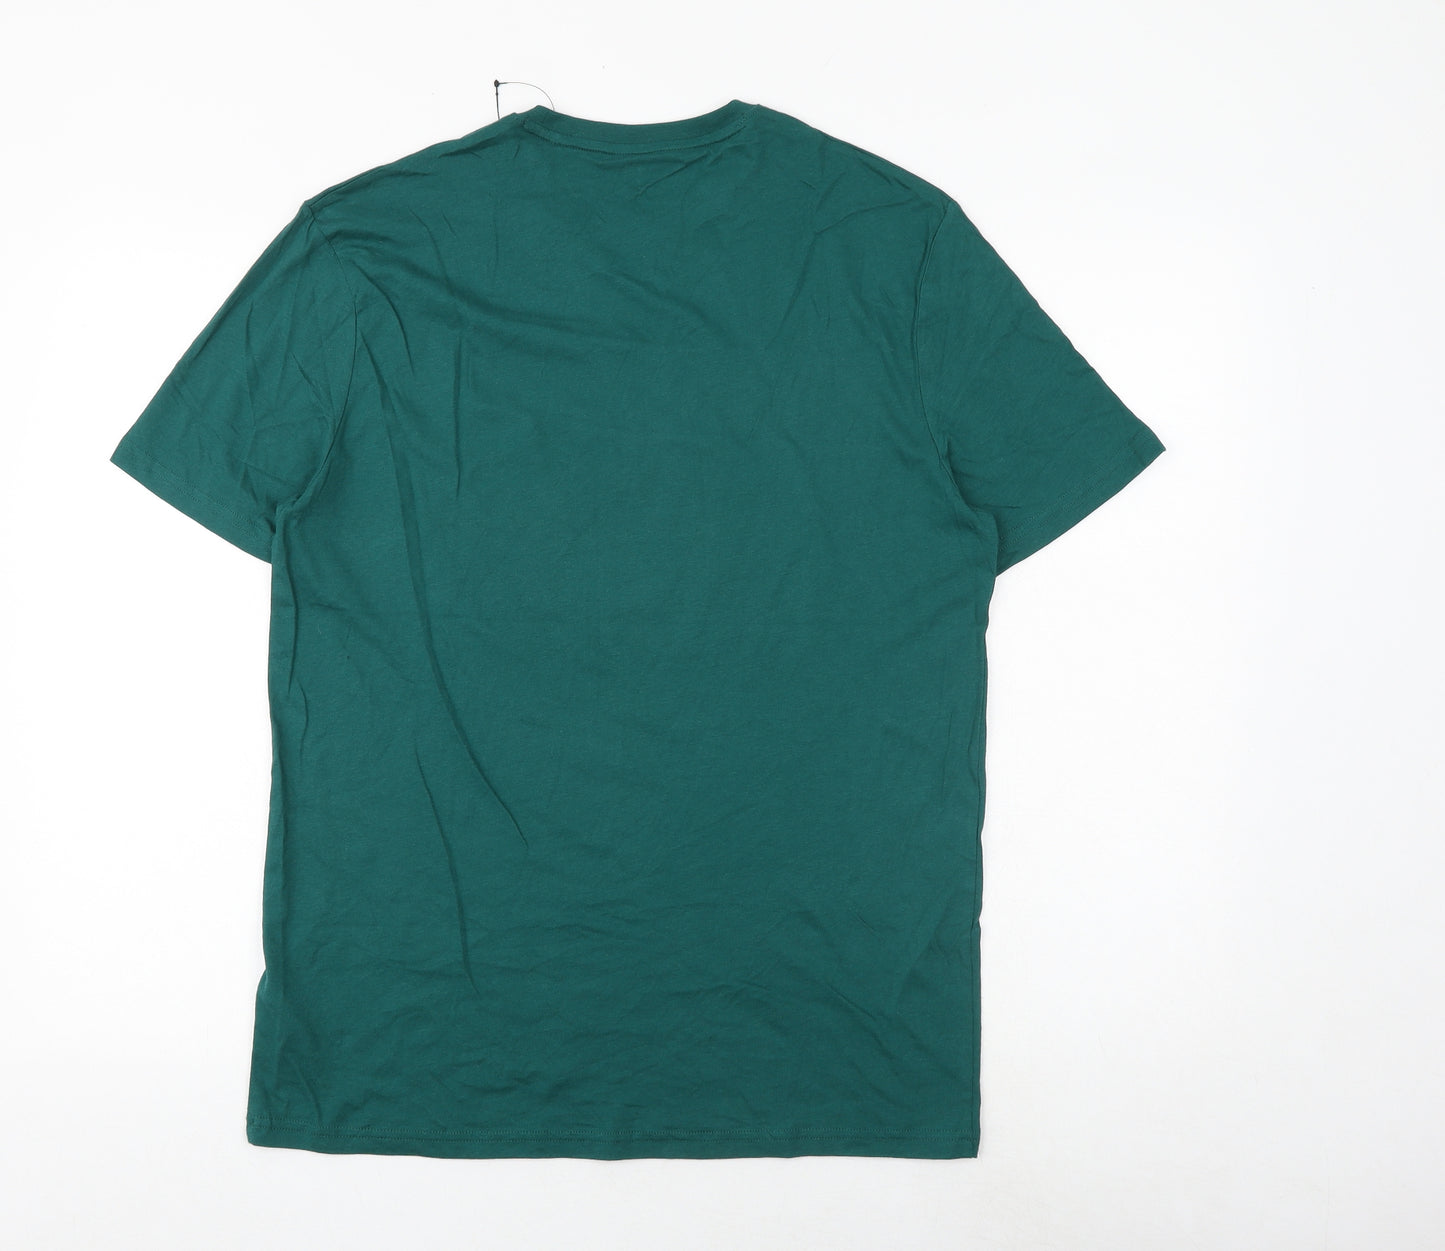 Marks and Spencer Mens Green Cotton T-Shirt Size M Round Neck - Christmas Gin-gle all the way